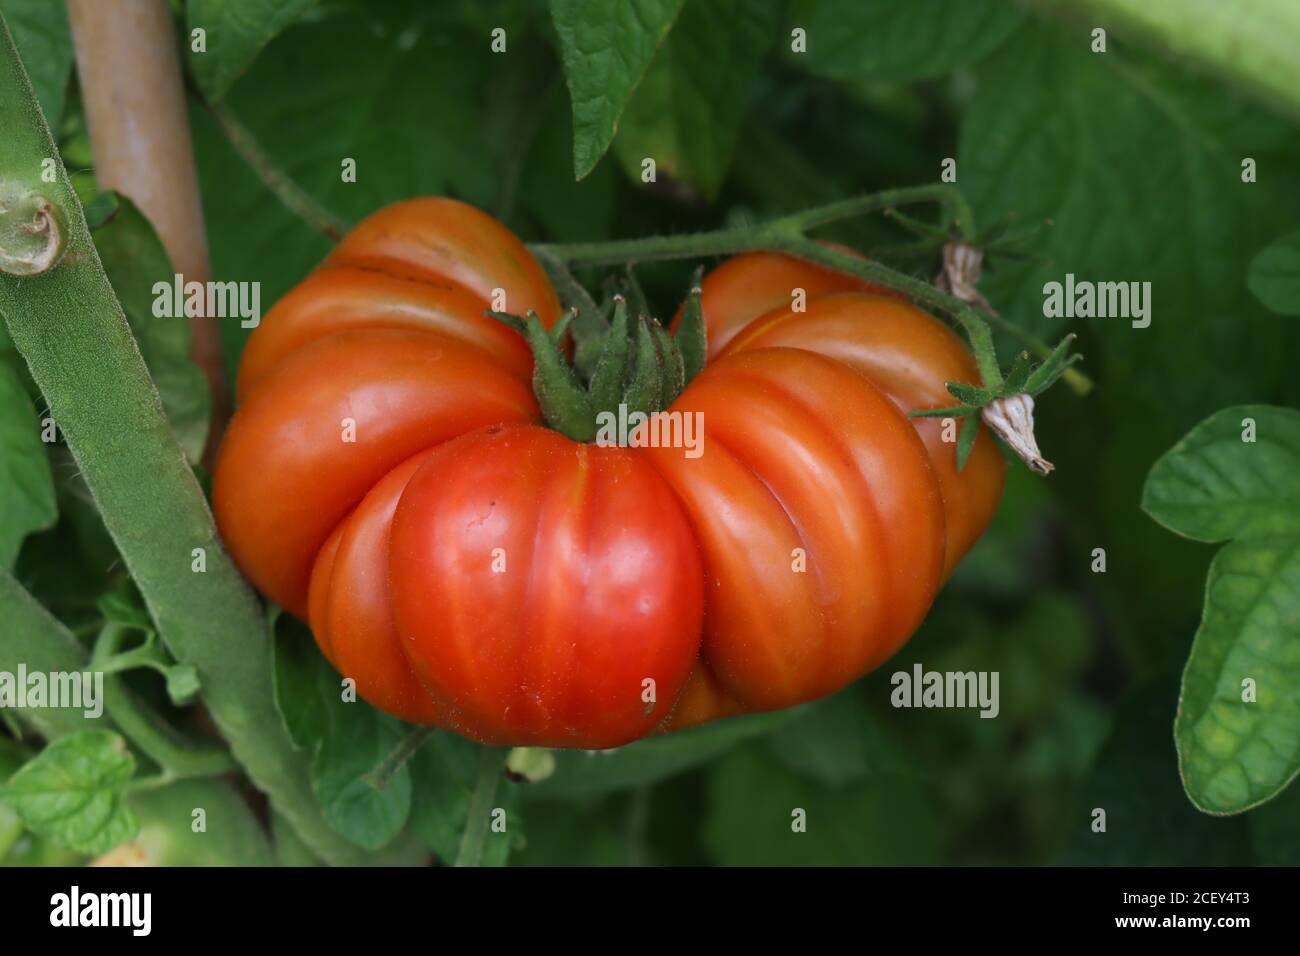 Beef tomatoes growing in the garden wobbly tomatoes Stock Photo